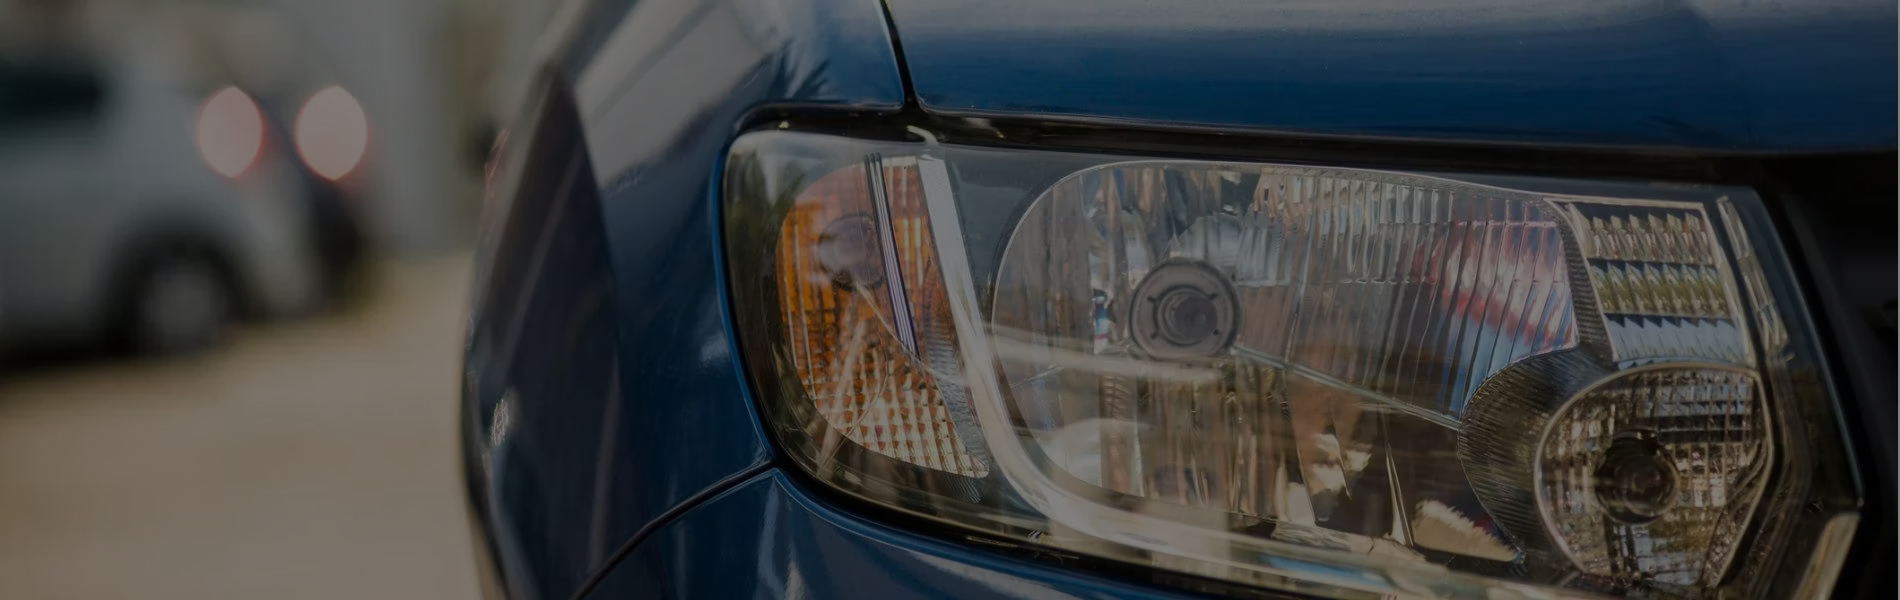 Exterior And Glass - Auto Glass and Headlights Services - Car Windshield Replacement Near Me